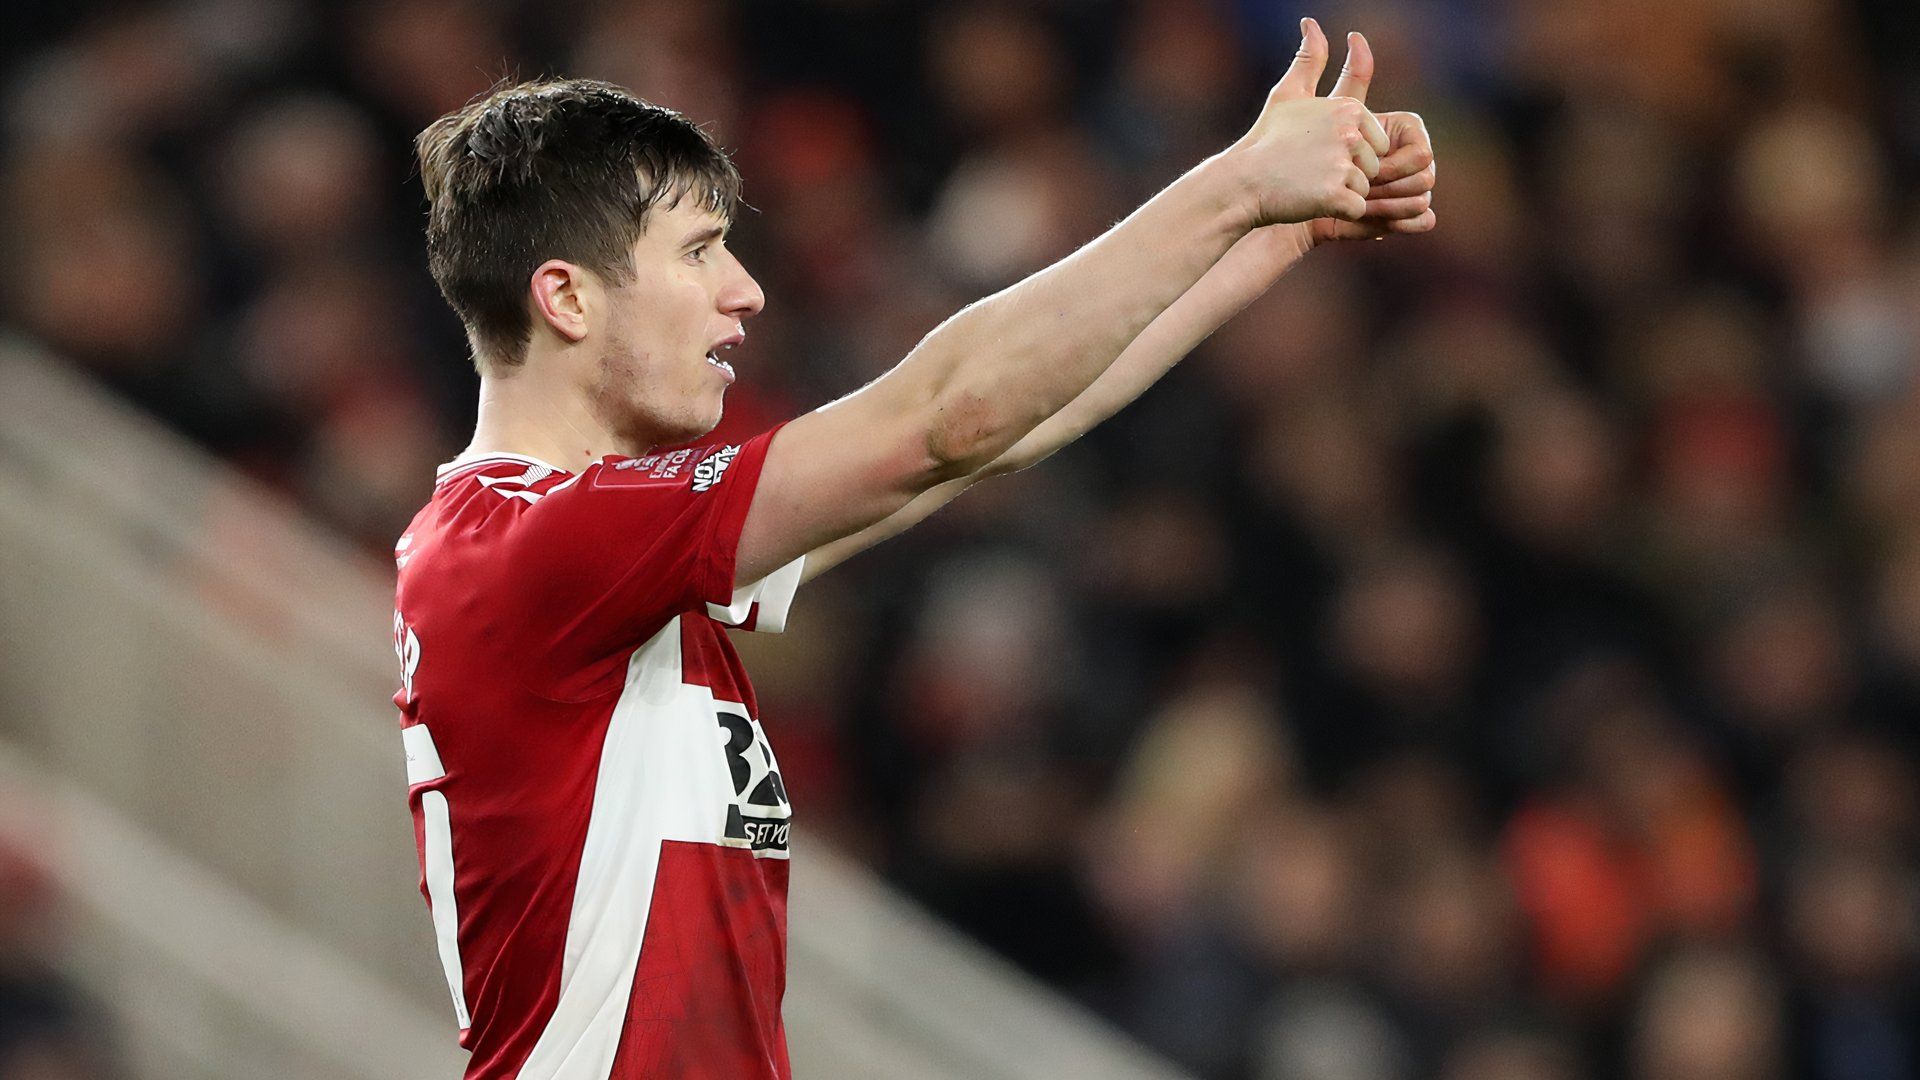 Middlesbrough defender Paddy McNair